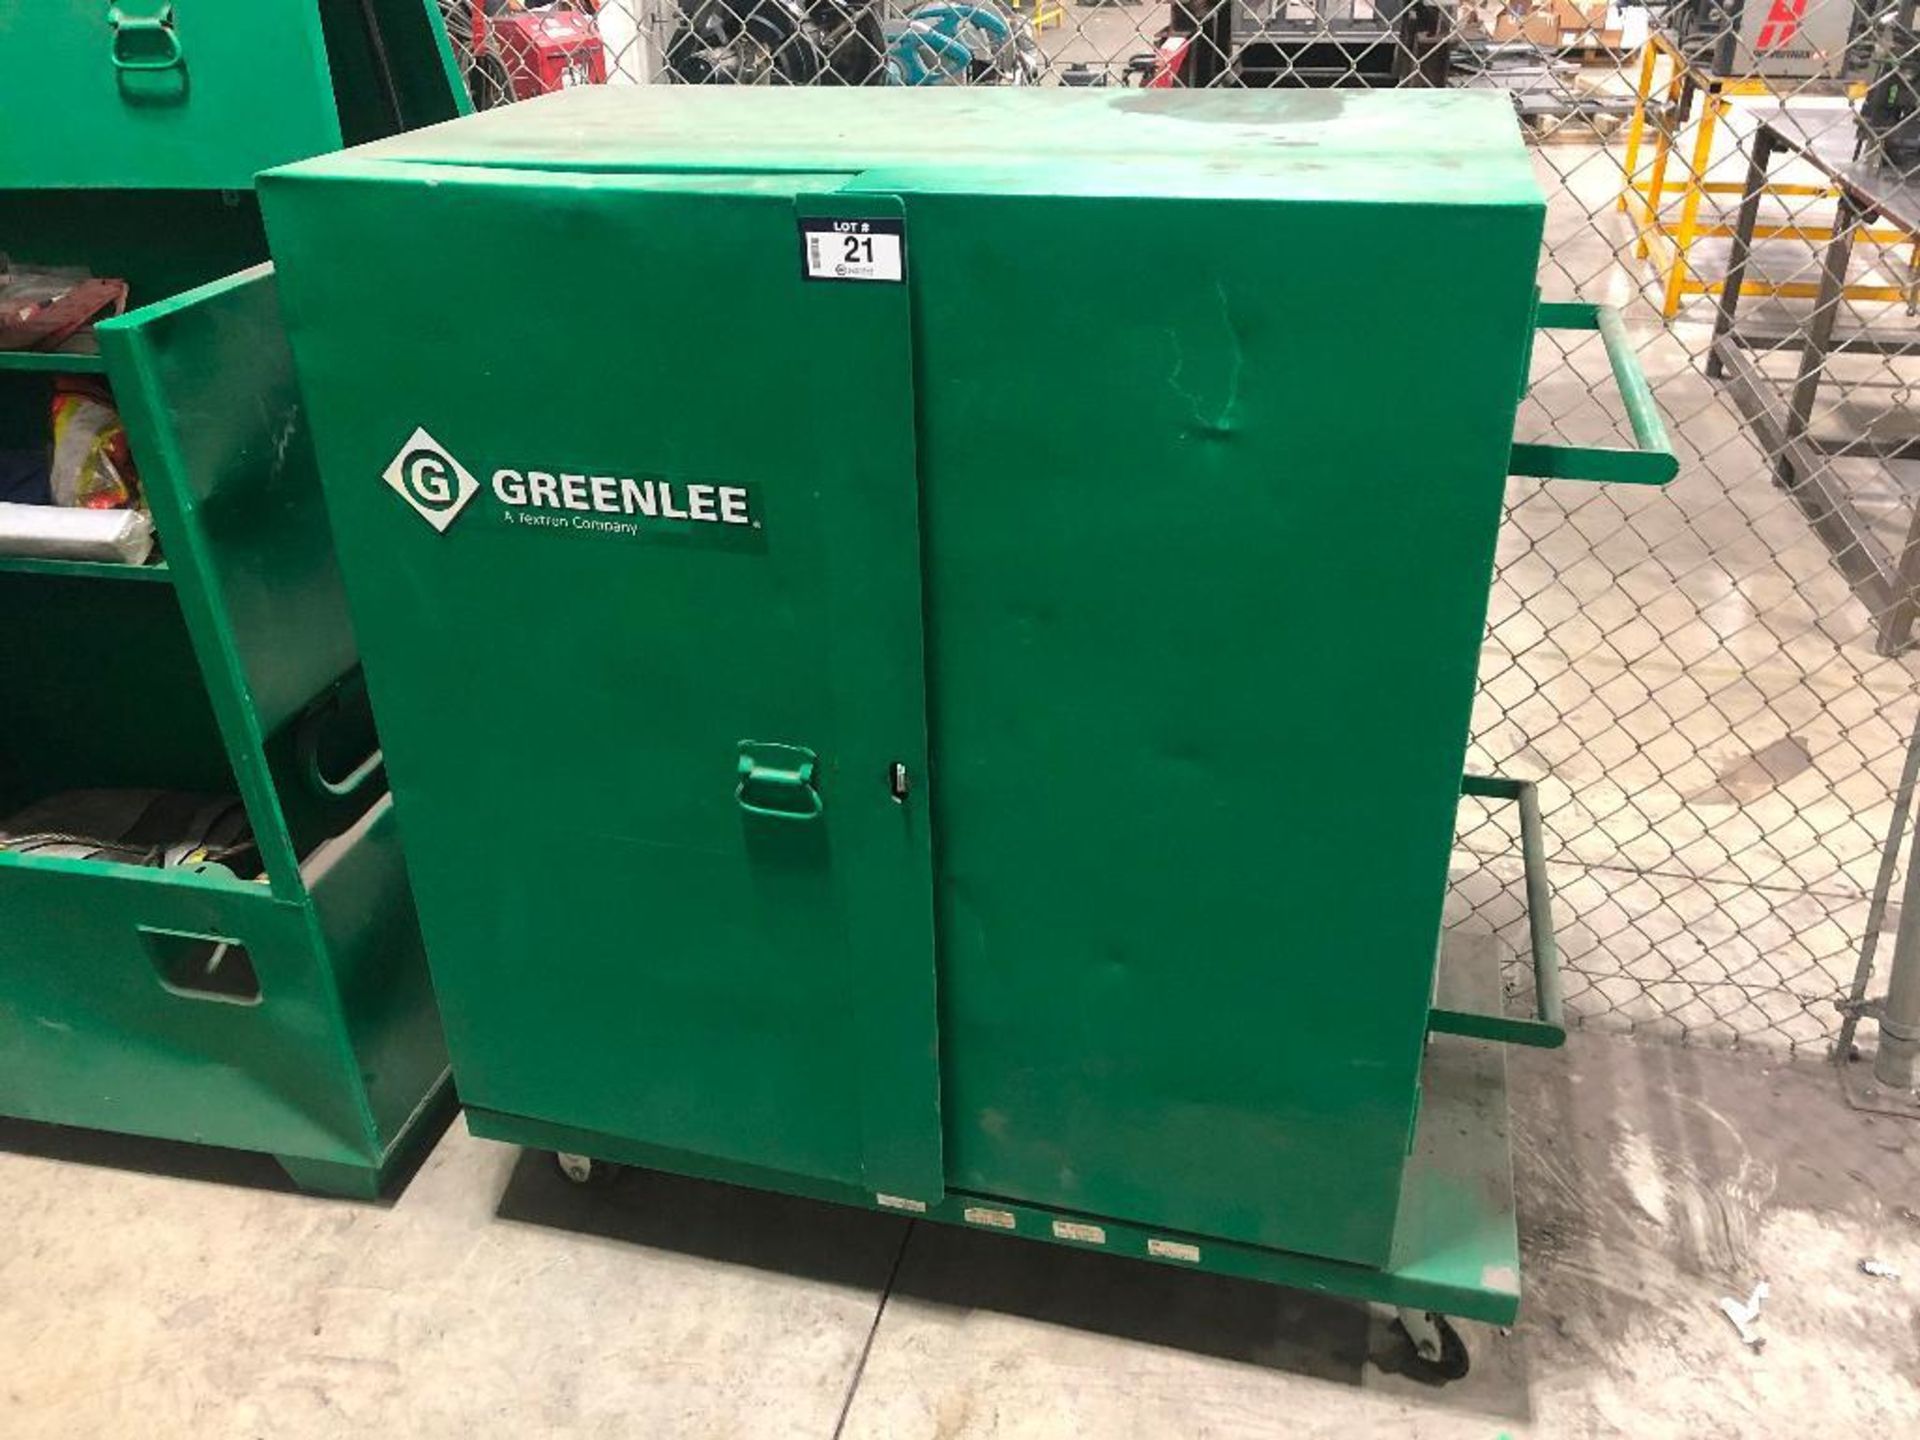 Greenlee Mesh Utility Cabinet w/ Asst. Contents including Hard Hats, First Aid Kit, etc.